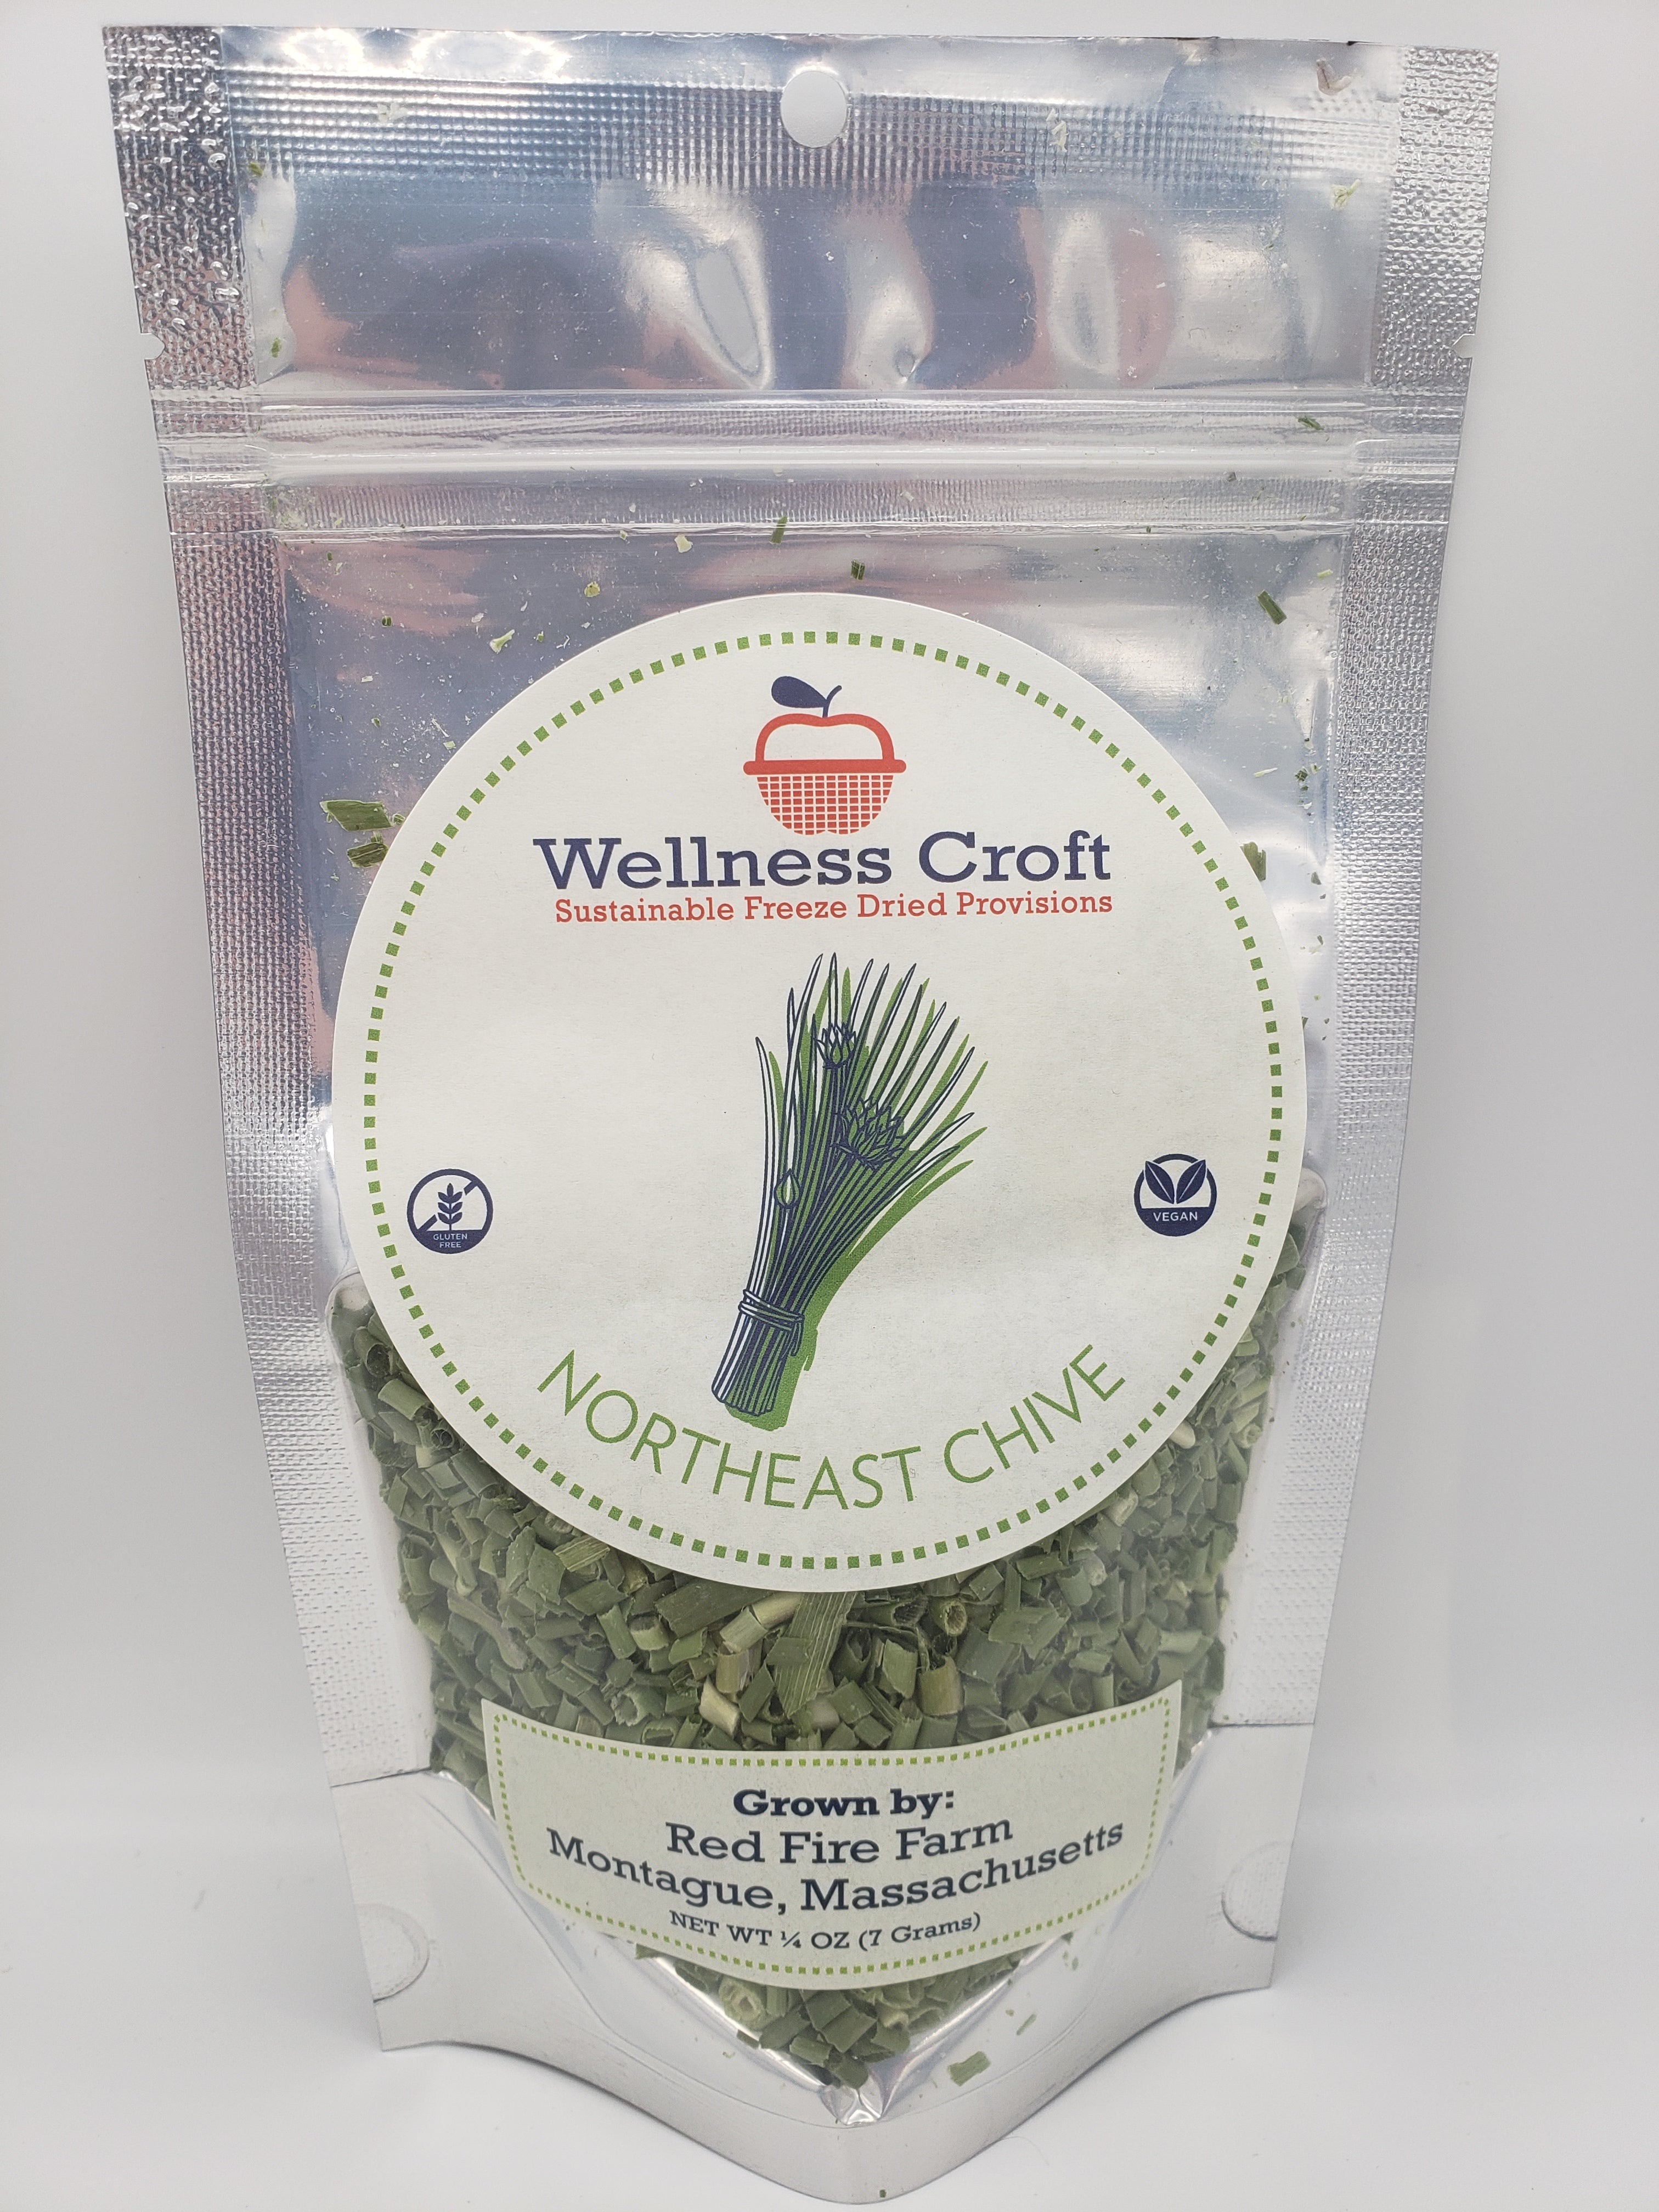 Freeze-dried Northeast Chive Herb